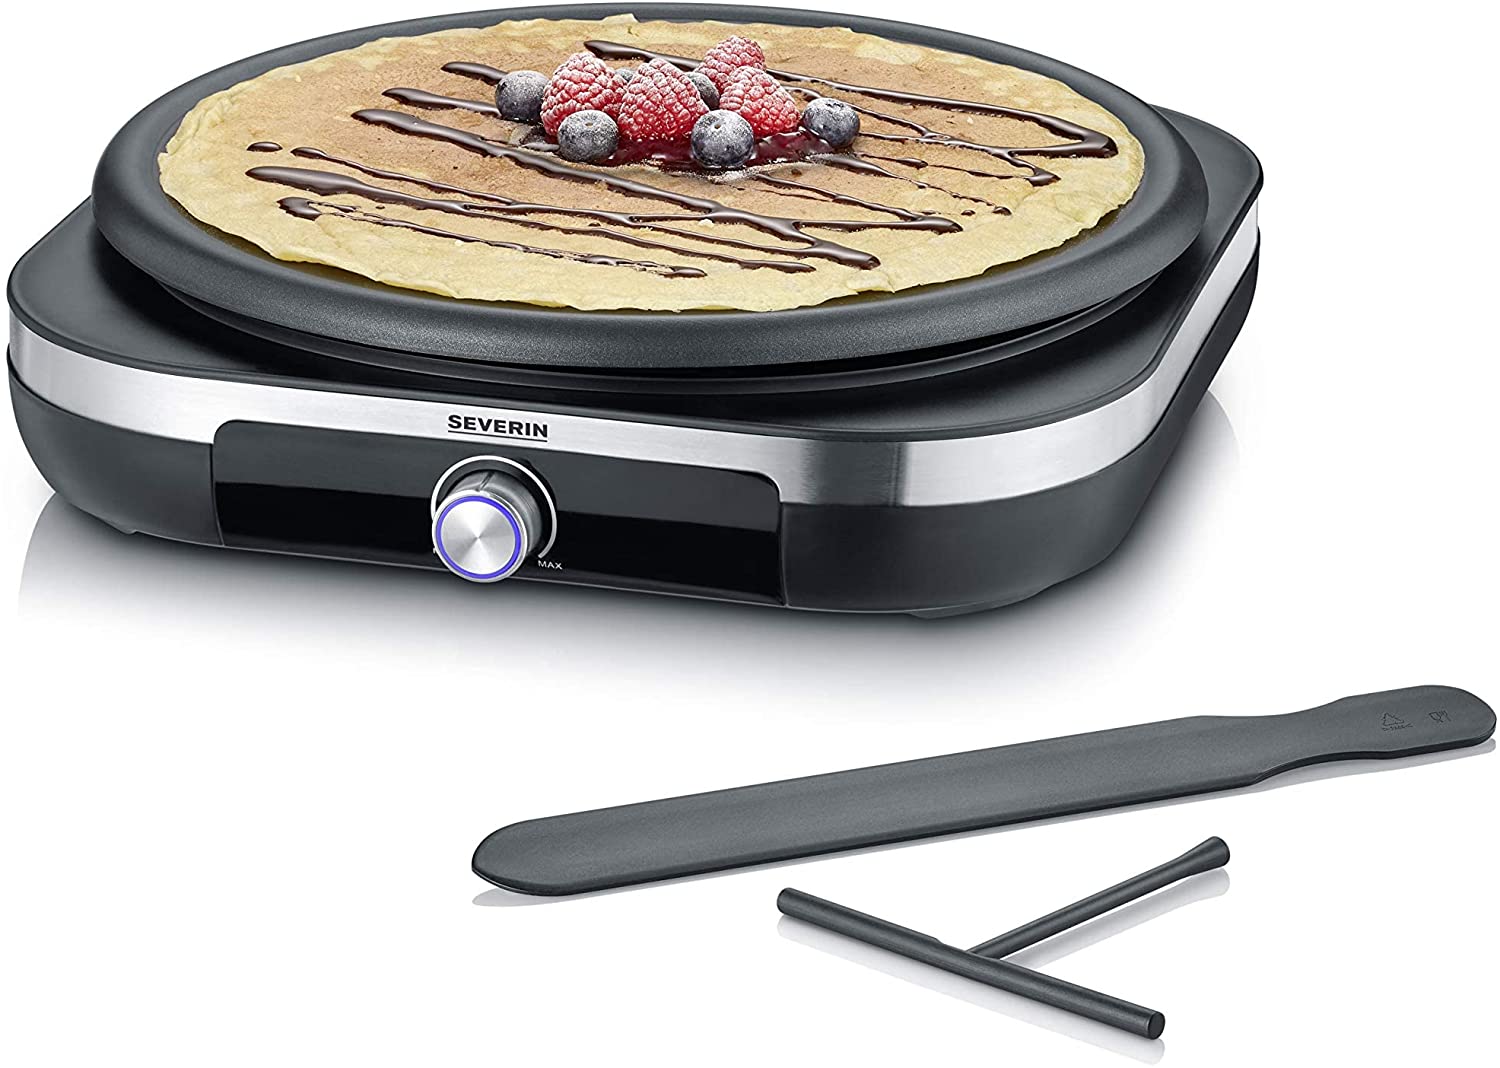 SEVERIN Crepe Maker, Crepe Iron for Sweet Crepes and Savoury Galettes, Crepes Maker with Removable XXL Grill Plate (38 cm), Approx. 1,500 W, Brushed Stainless Steel/Black, CM 2199